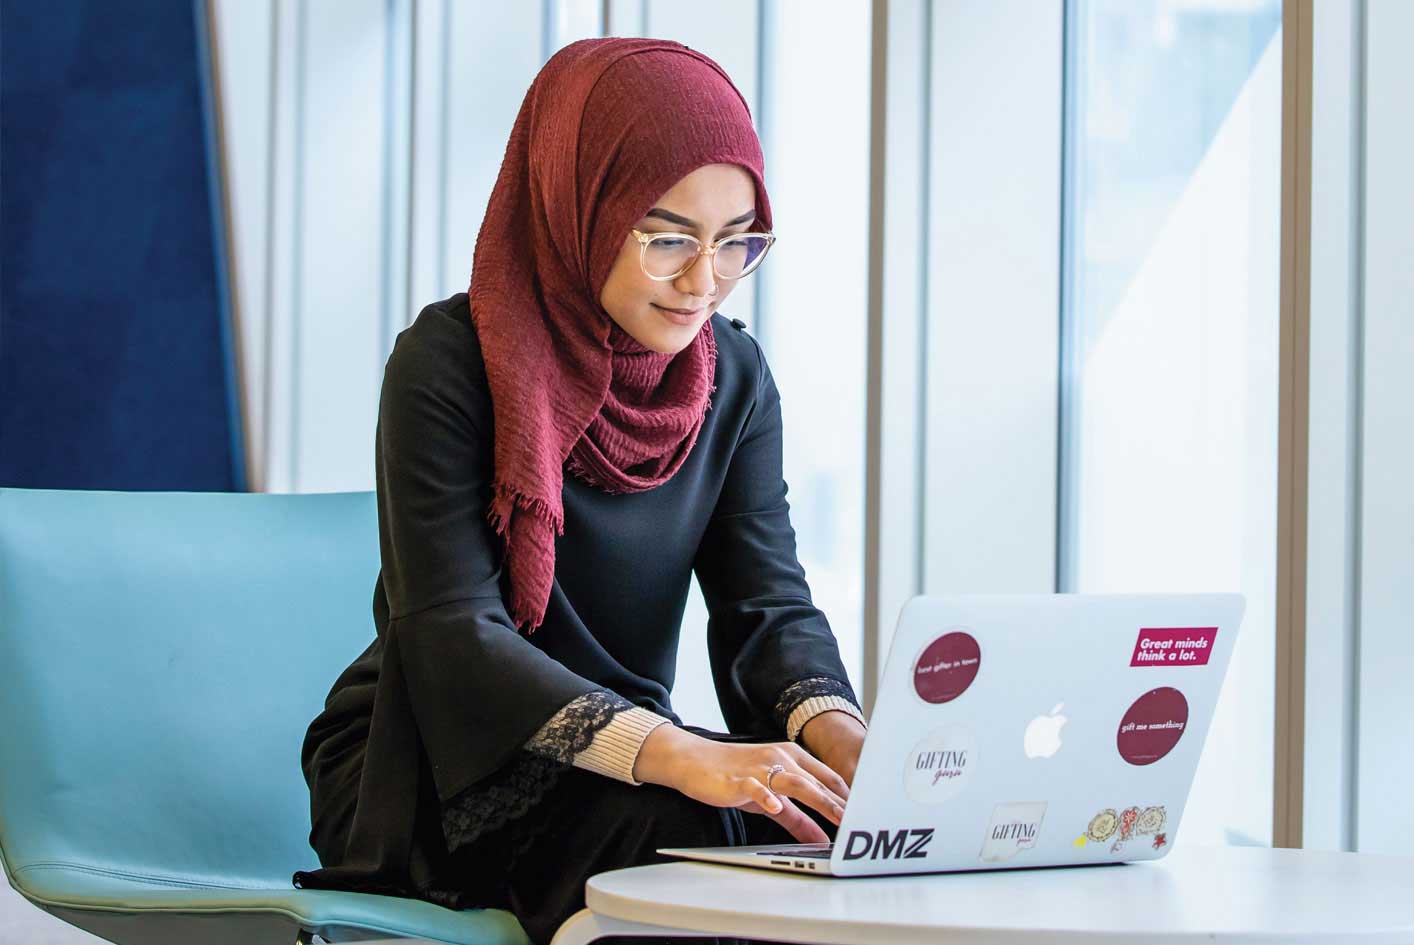 a female student wearing hijab typing on a laptop